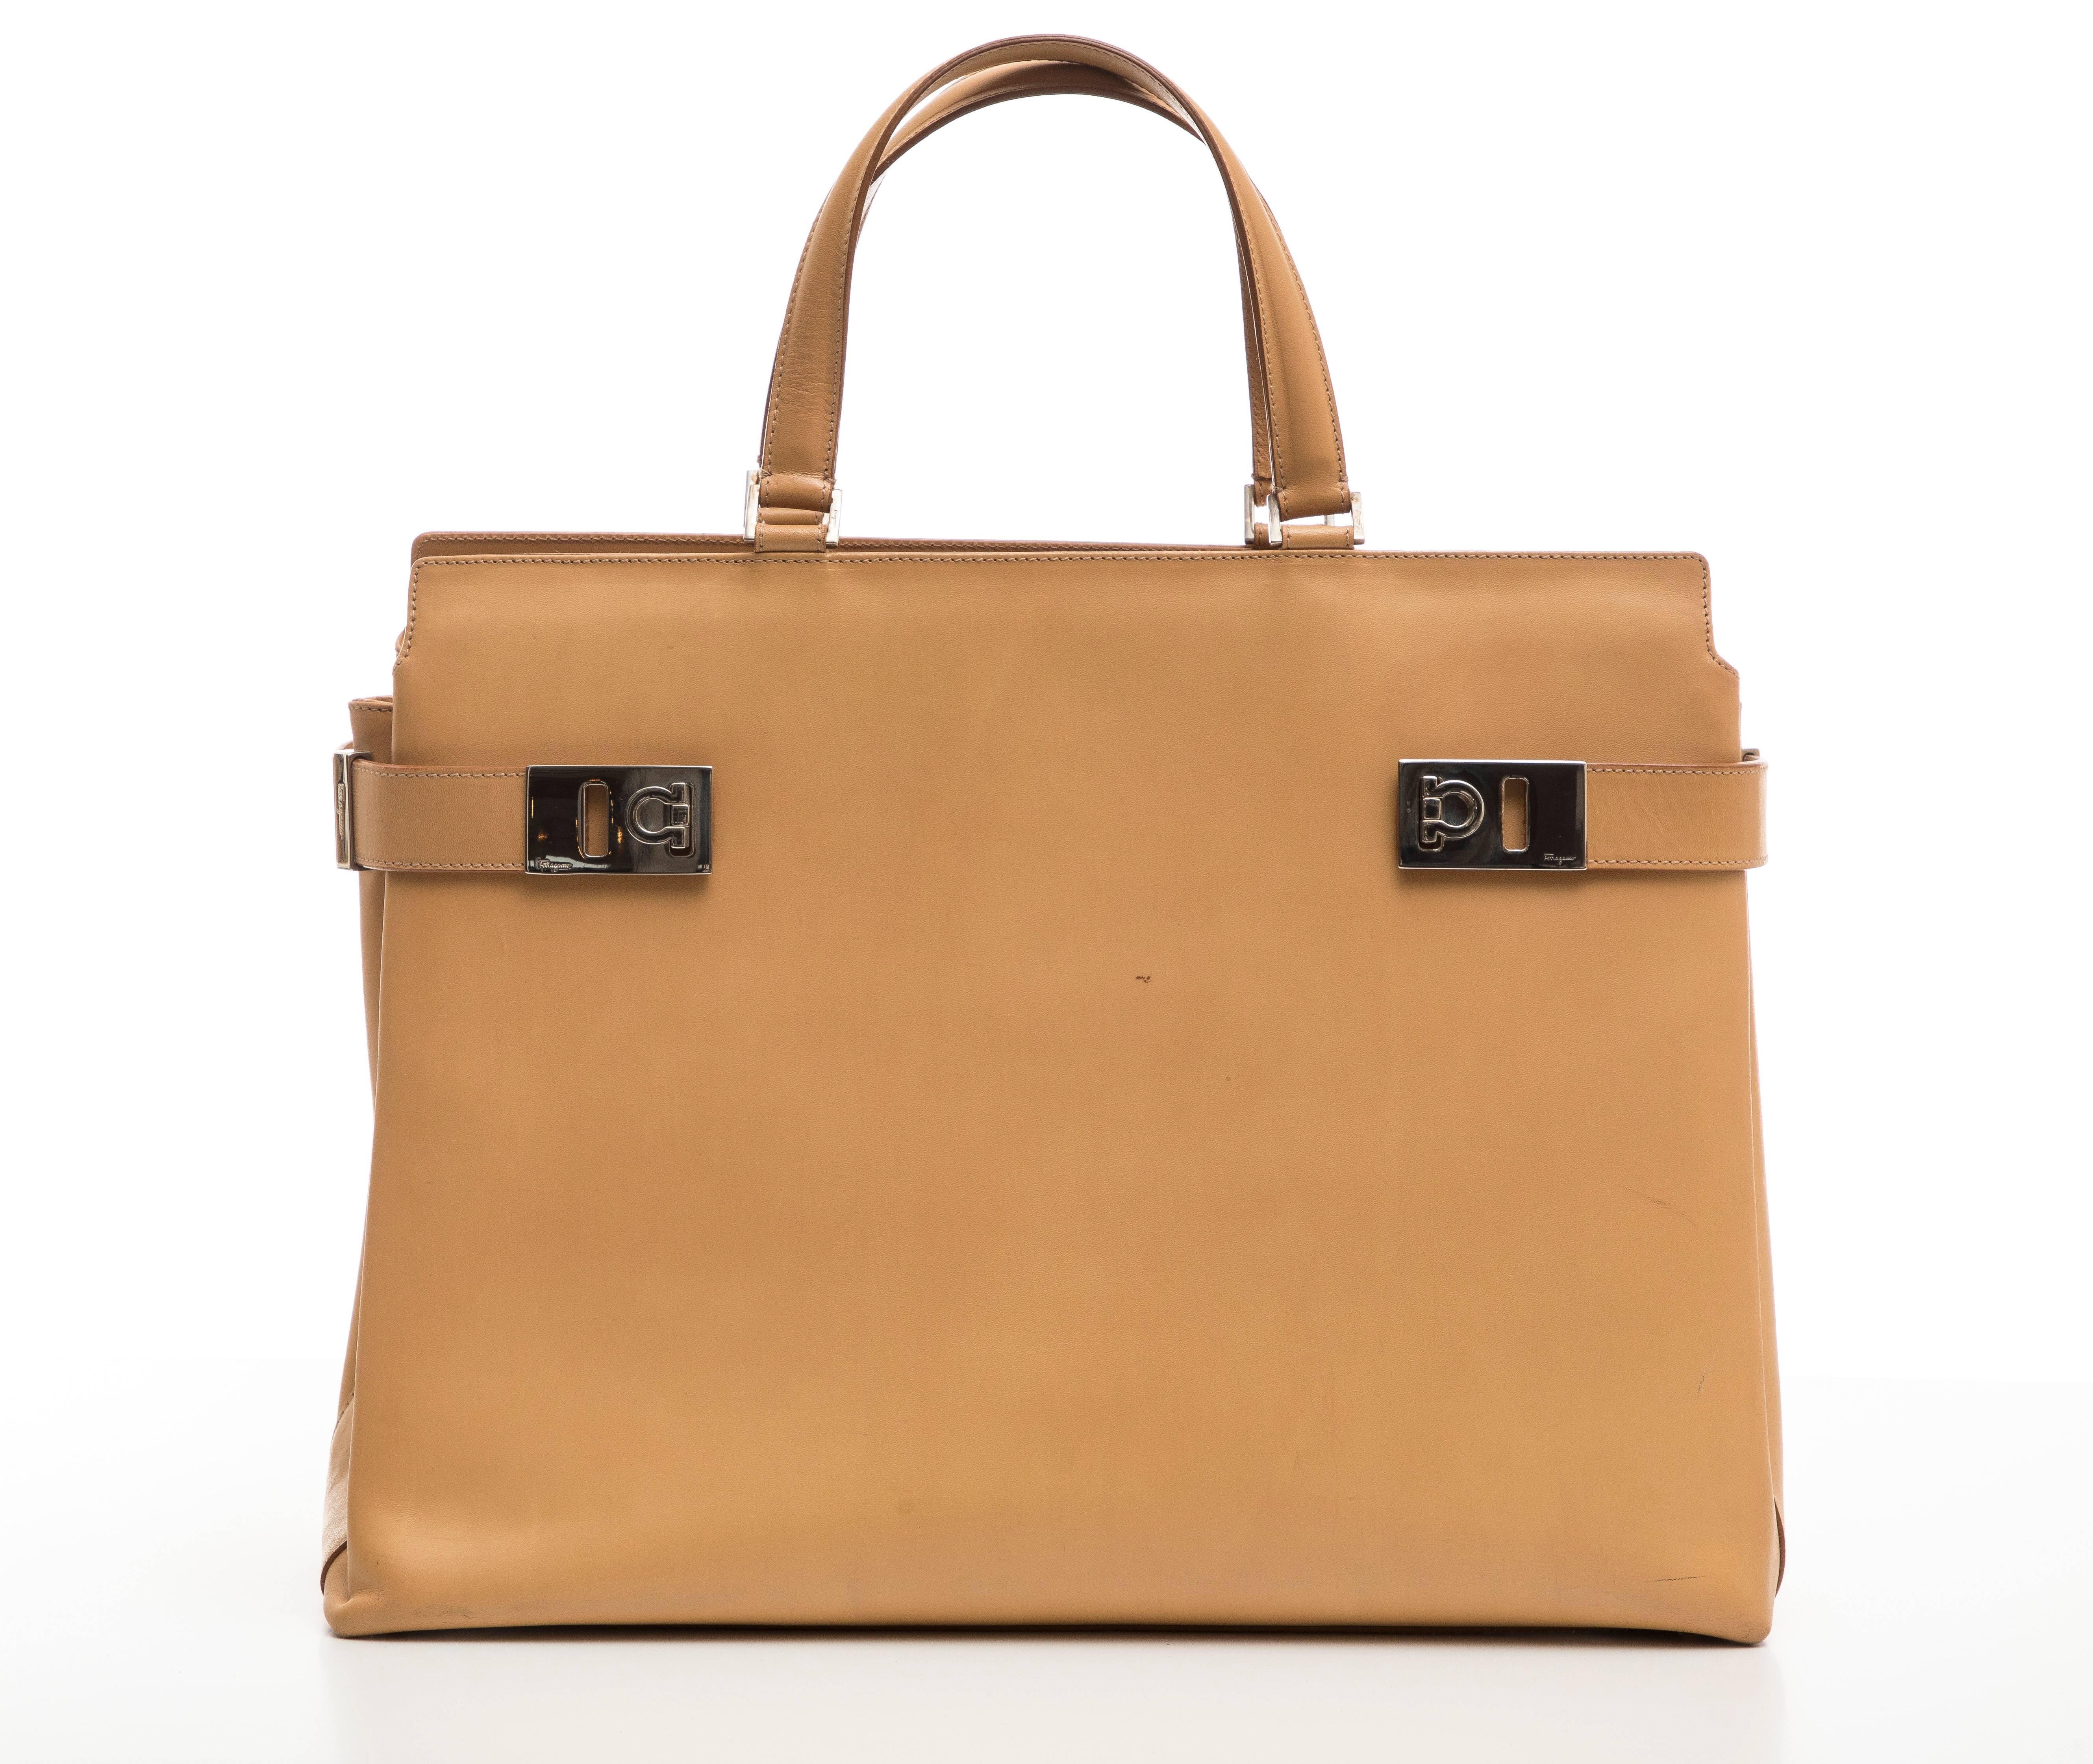 Salvatore Ferragamo butterscotch leather handbag with interior zip pocket and attached shoulder strap. Includes dust bag.

Height: 11, Width 15, Depth 6

